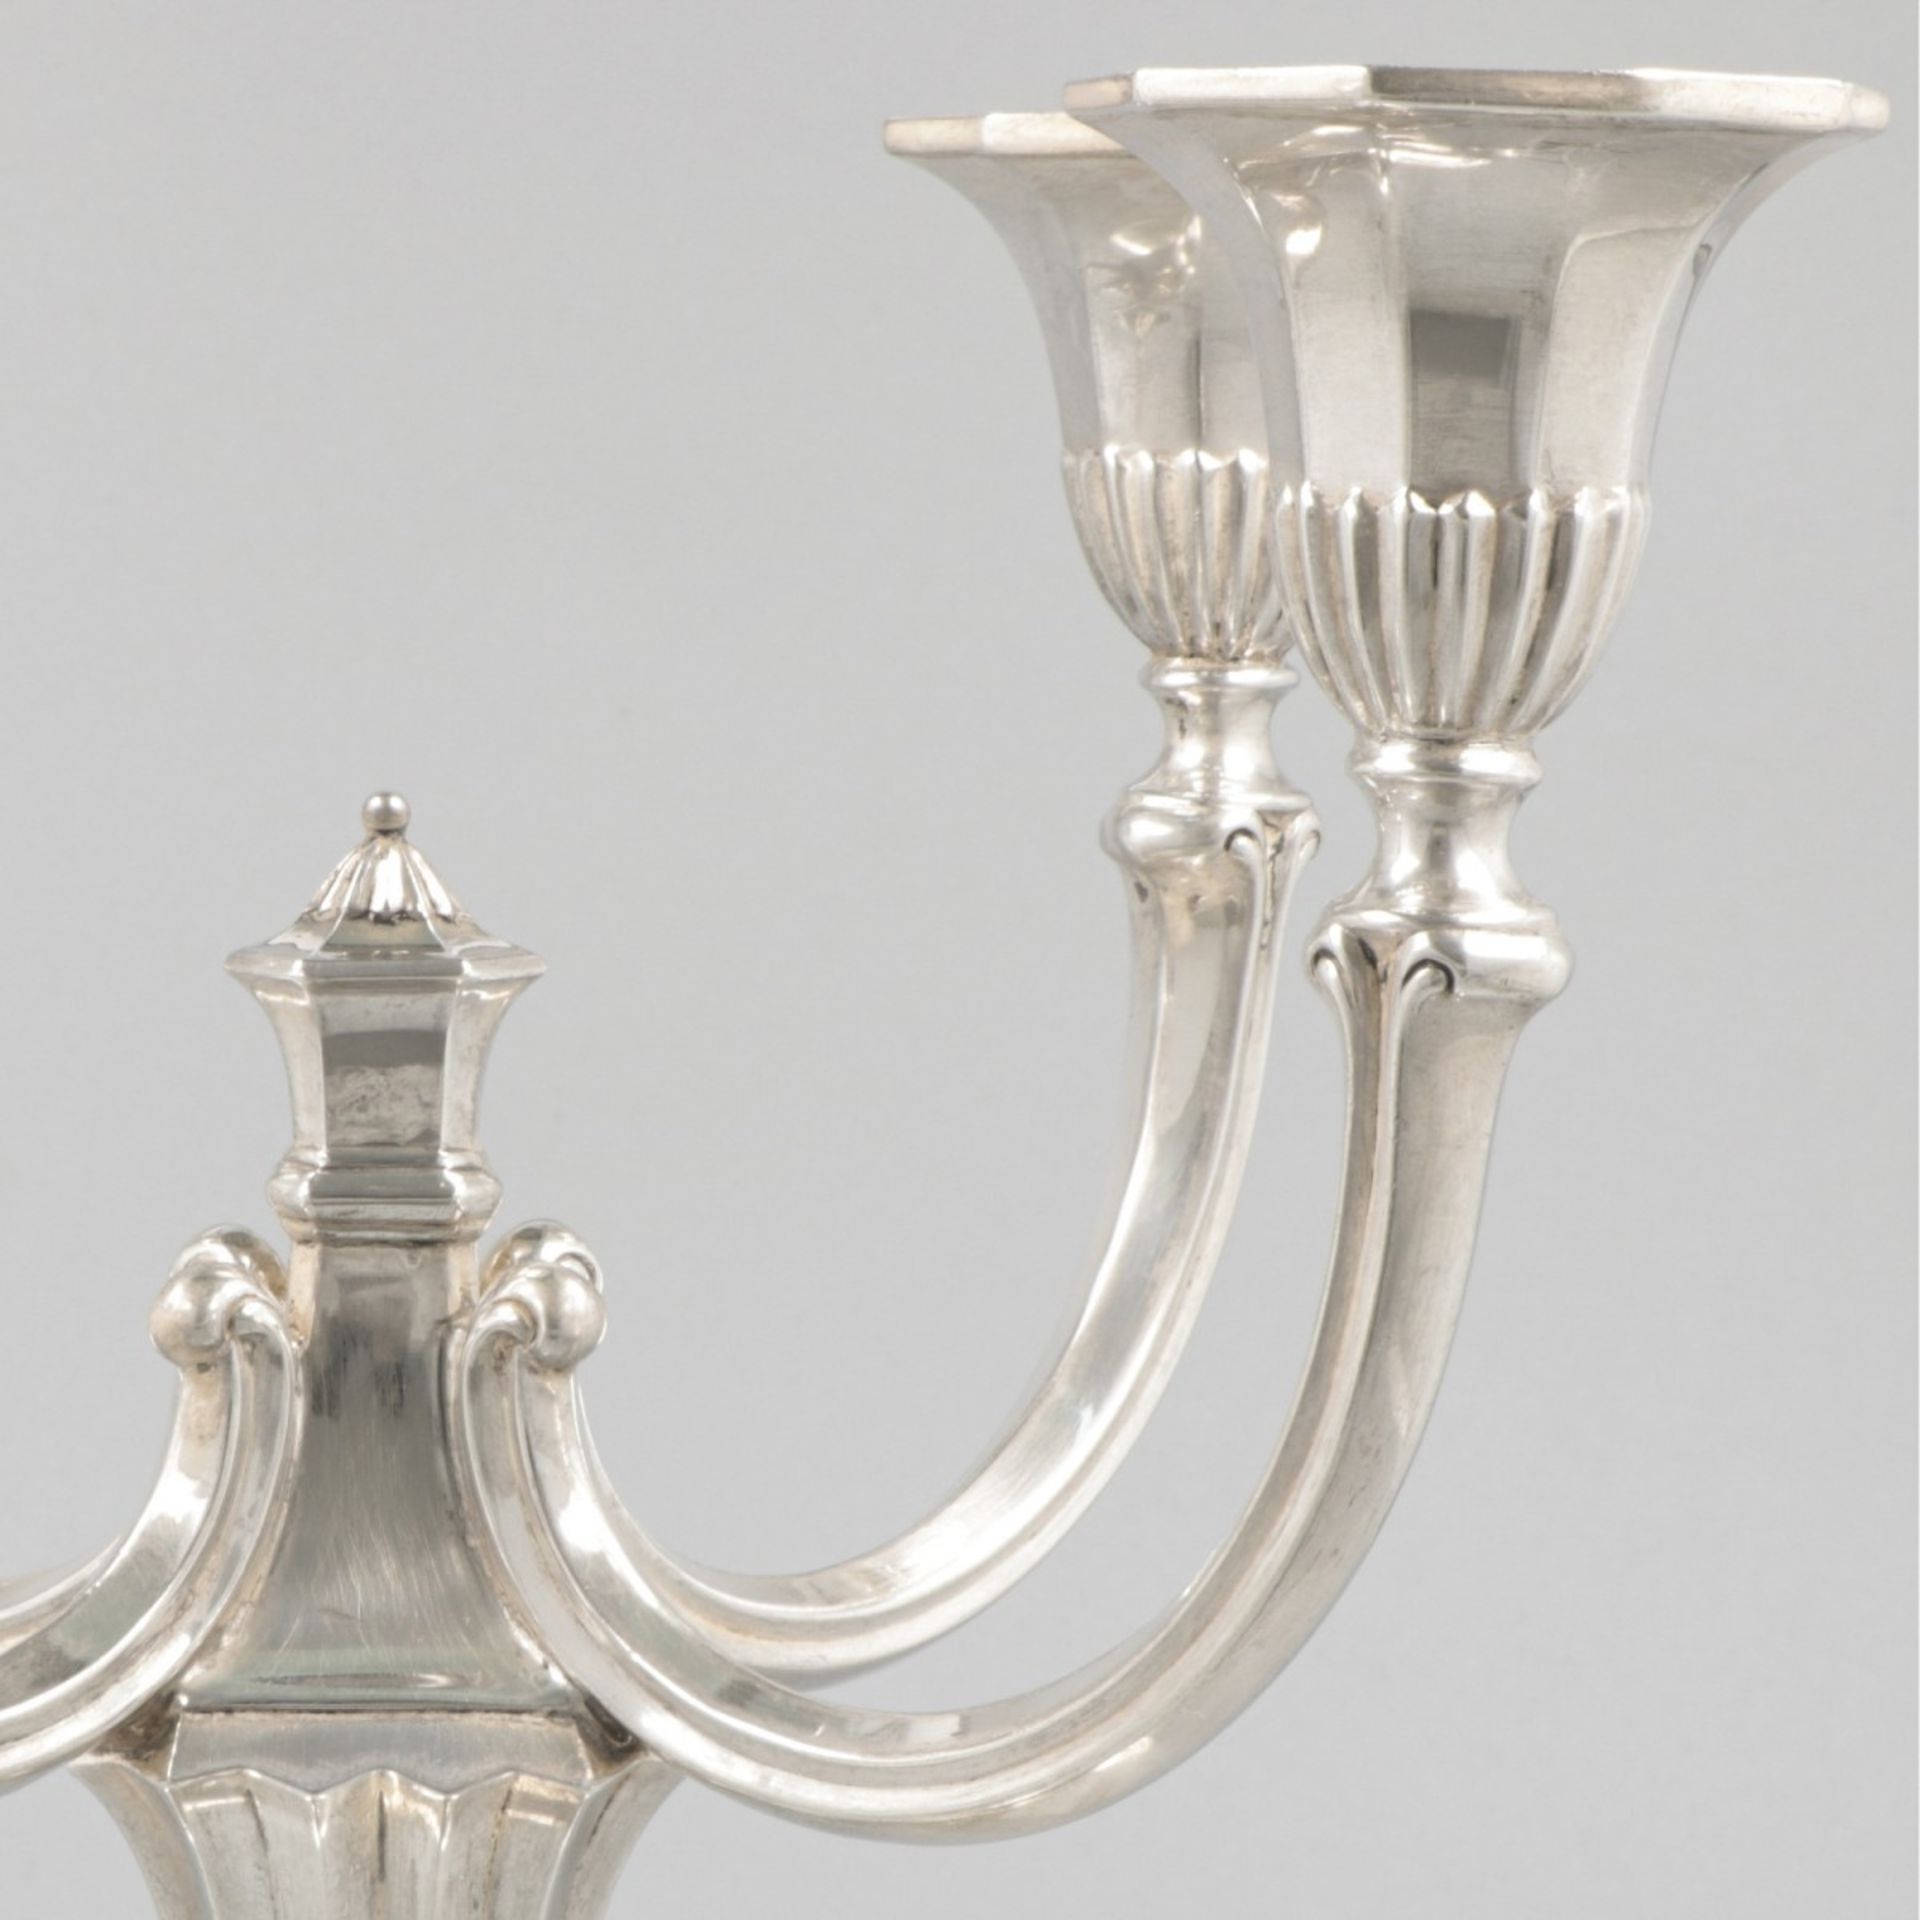 2-piece set of candlesticks silver. - Image 5 of 8